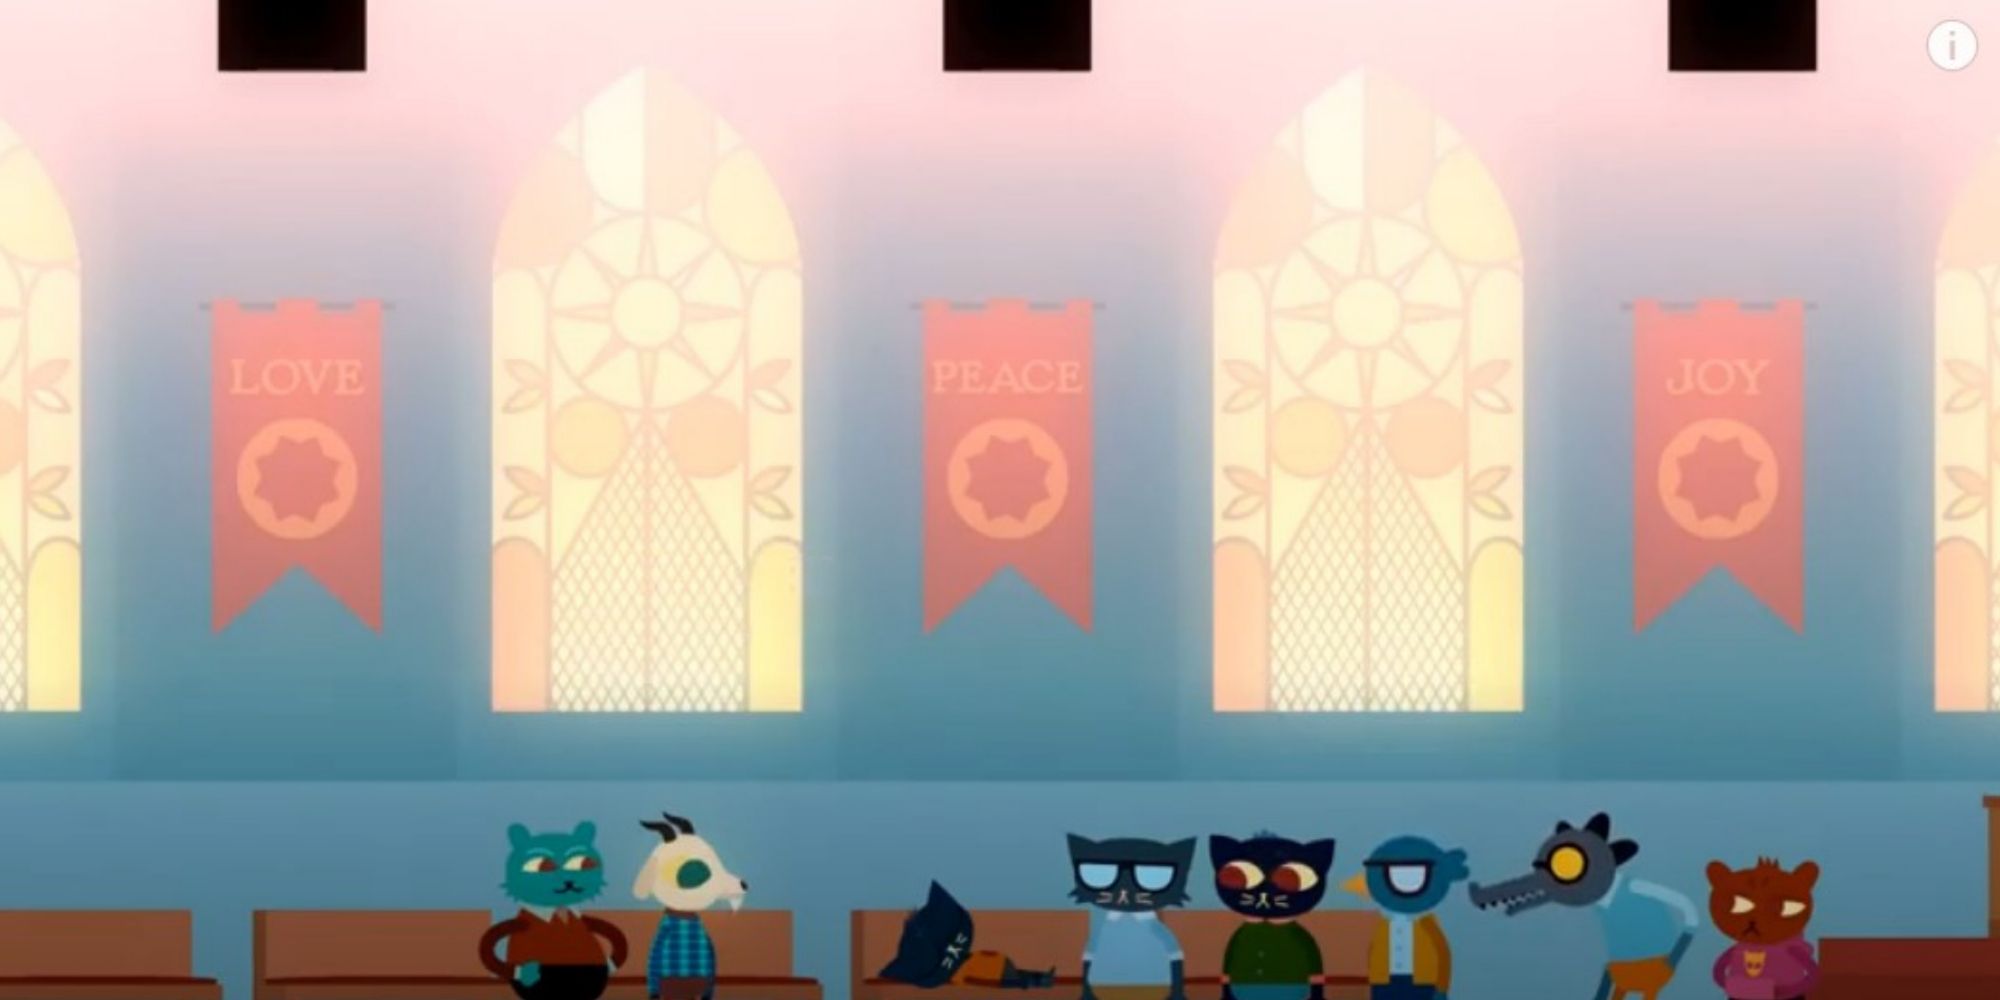 Mae unconscious in the church in Night in the Woods.